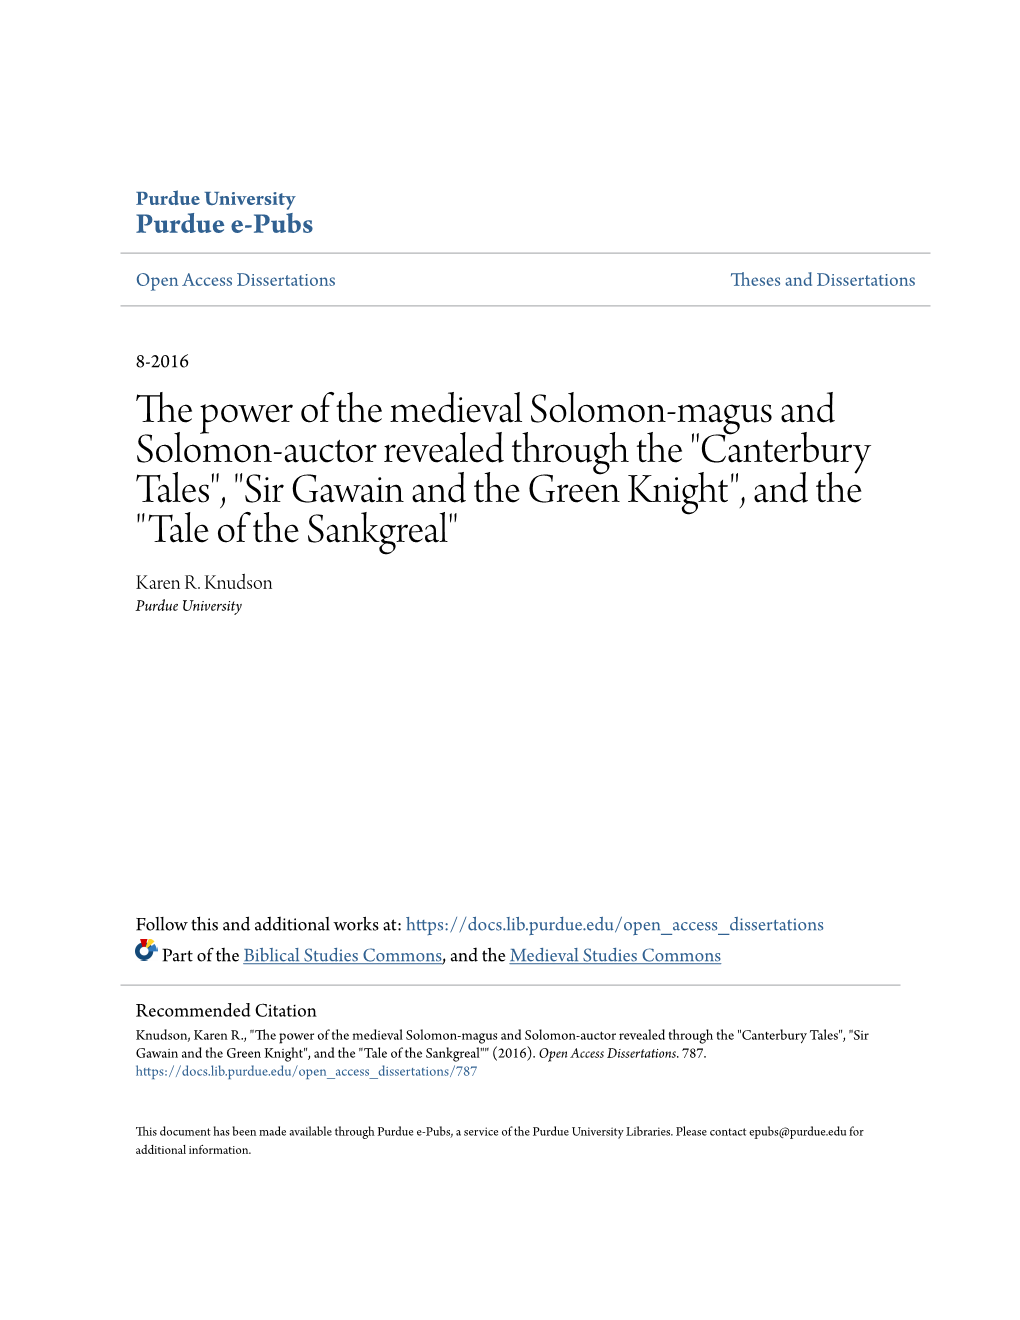 "Canterbury Tales", "Sir Gawain and the Green Knight", and the "Tale of the Sankgreal" Karen R